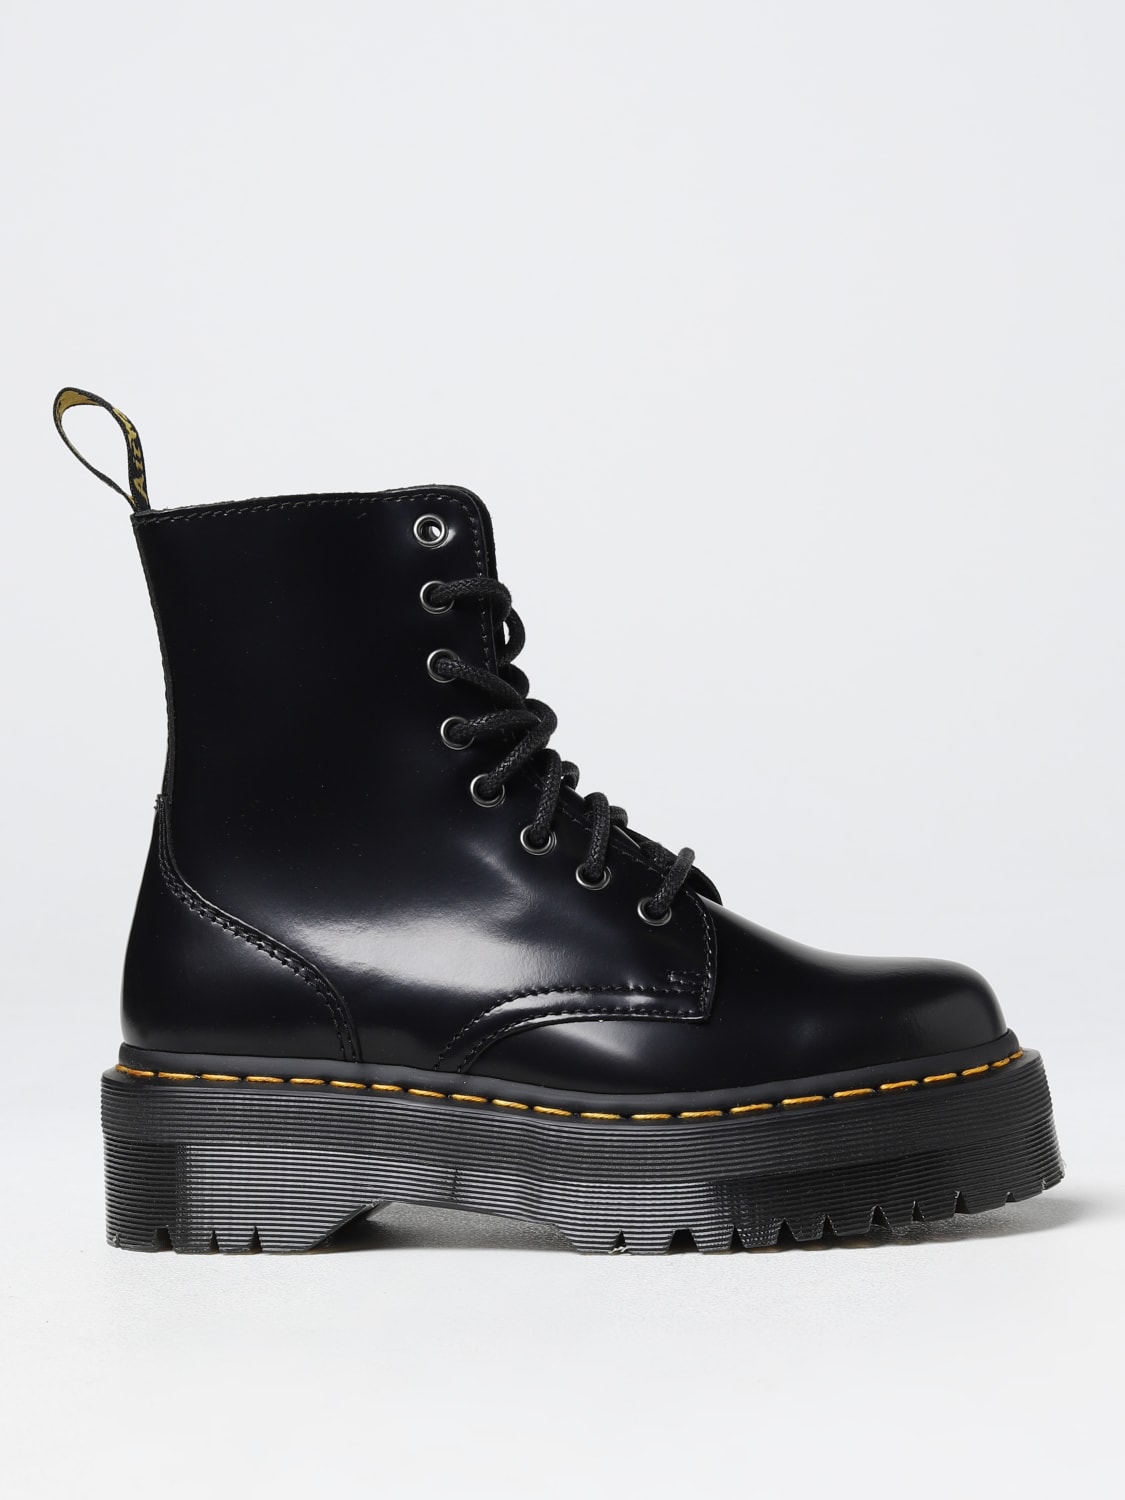 Women's Dr. Martens Booties & Ankle Boots